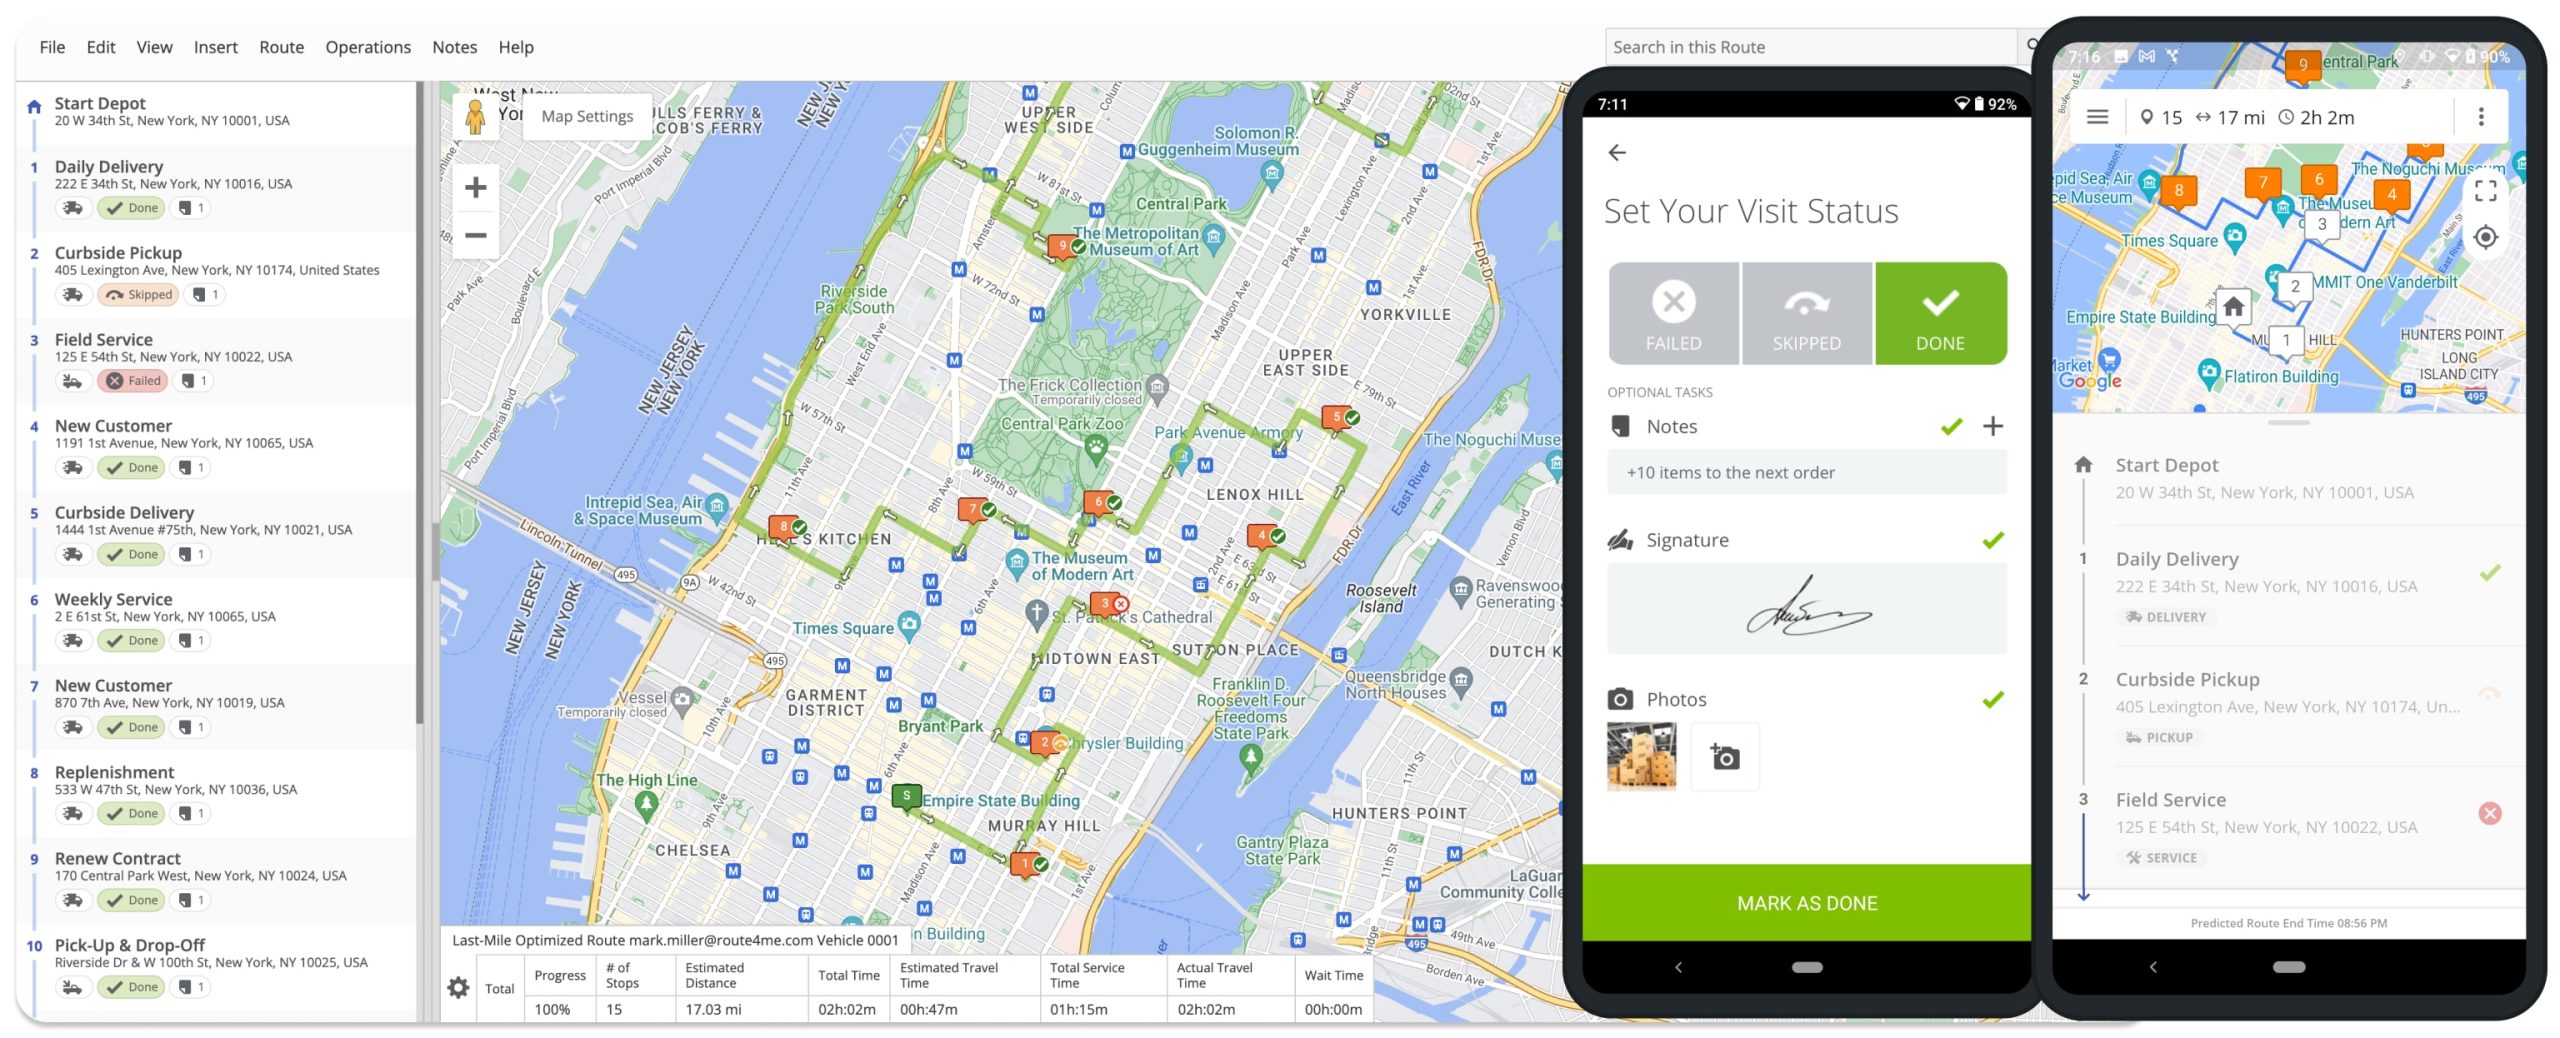 Synchronize route data and progress in real-time between Route4Me's Mobile Driver Route Planner app and Web Platform.